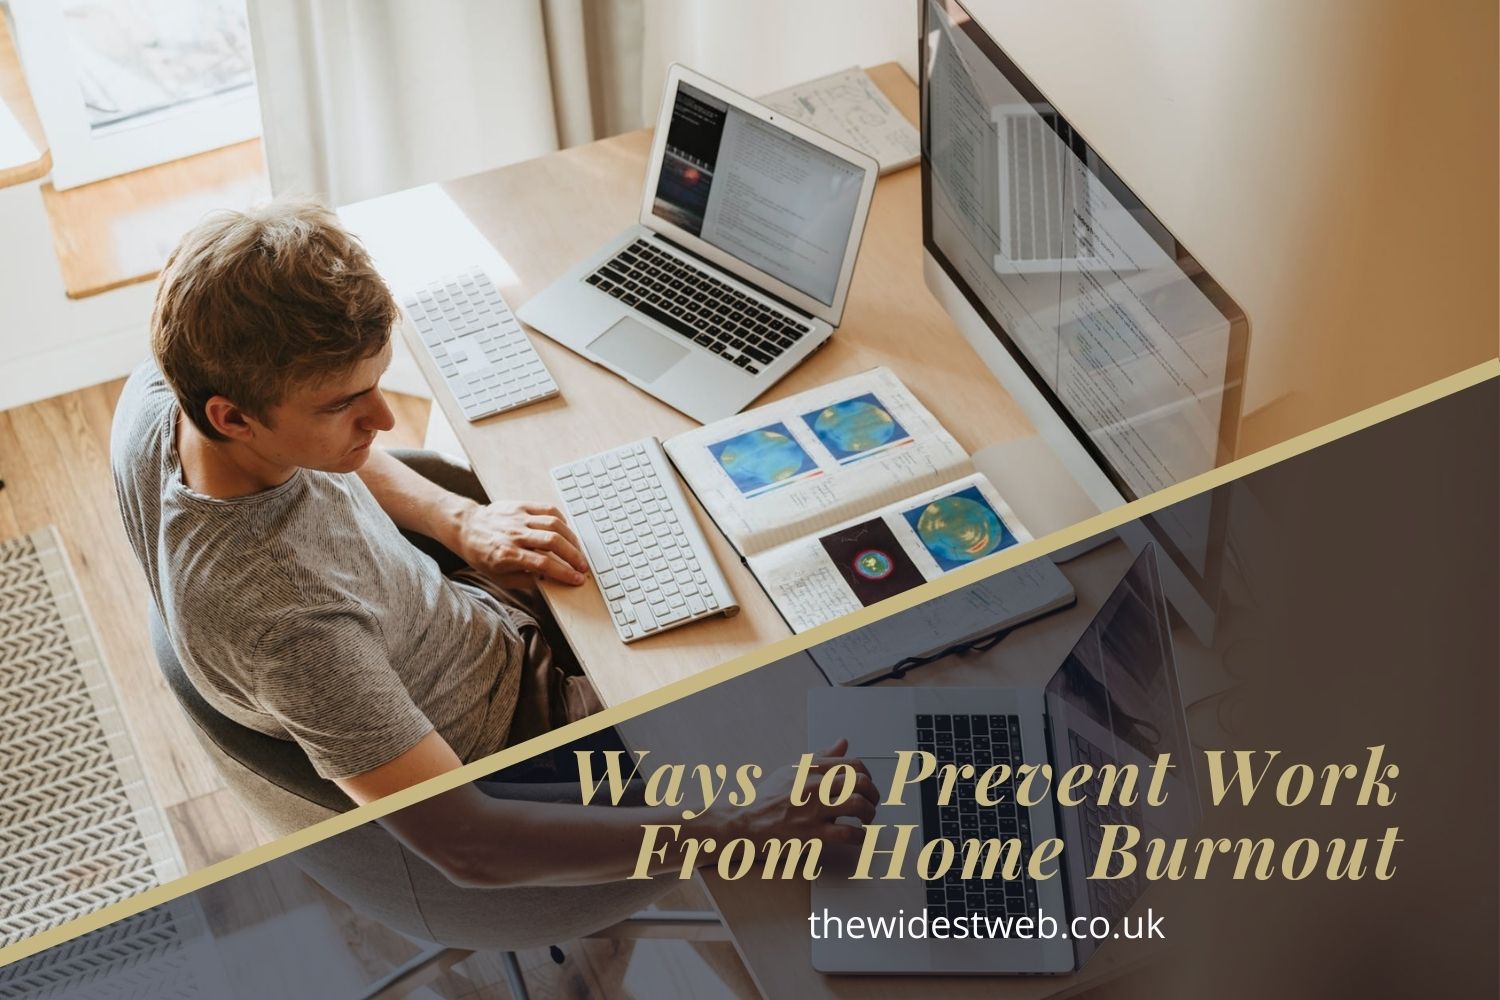 5 Ways to Prevent Work From Home Burnout